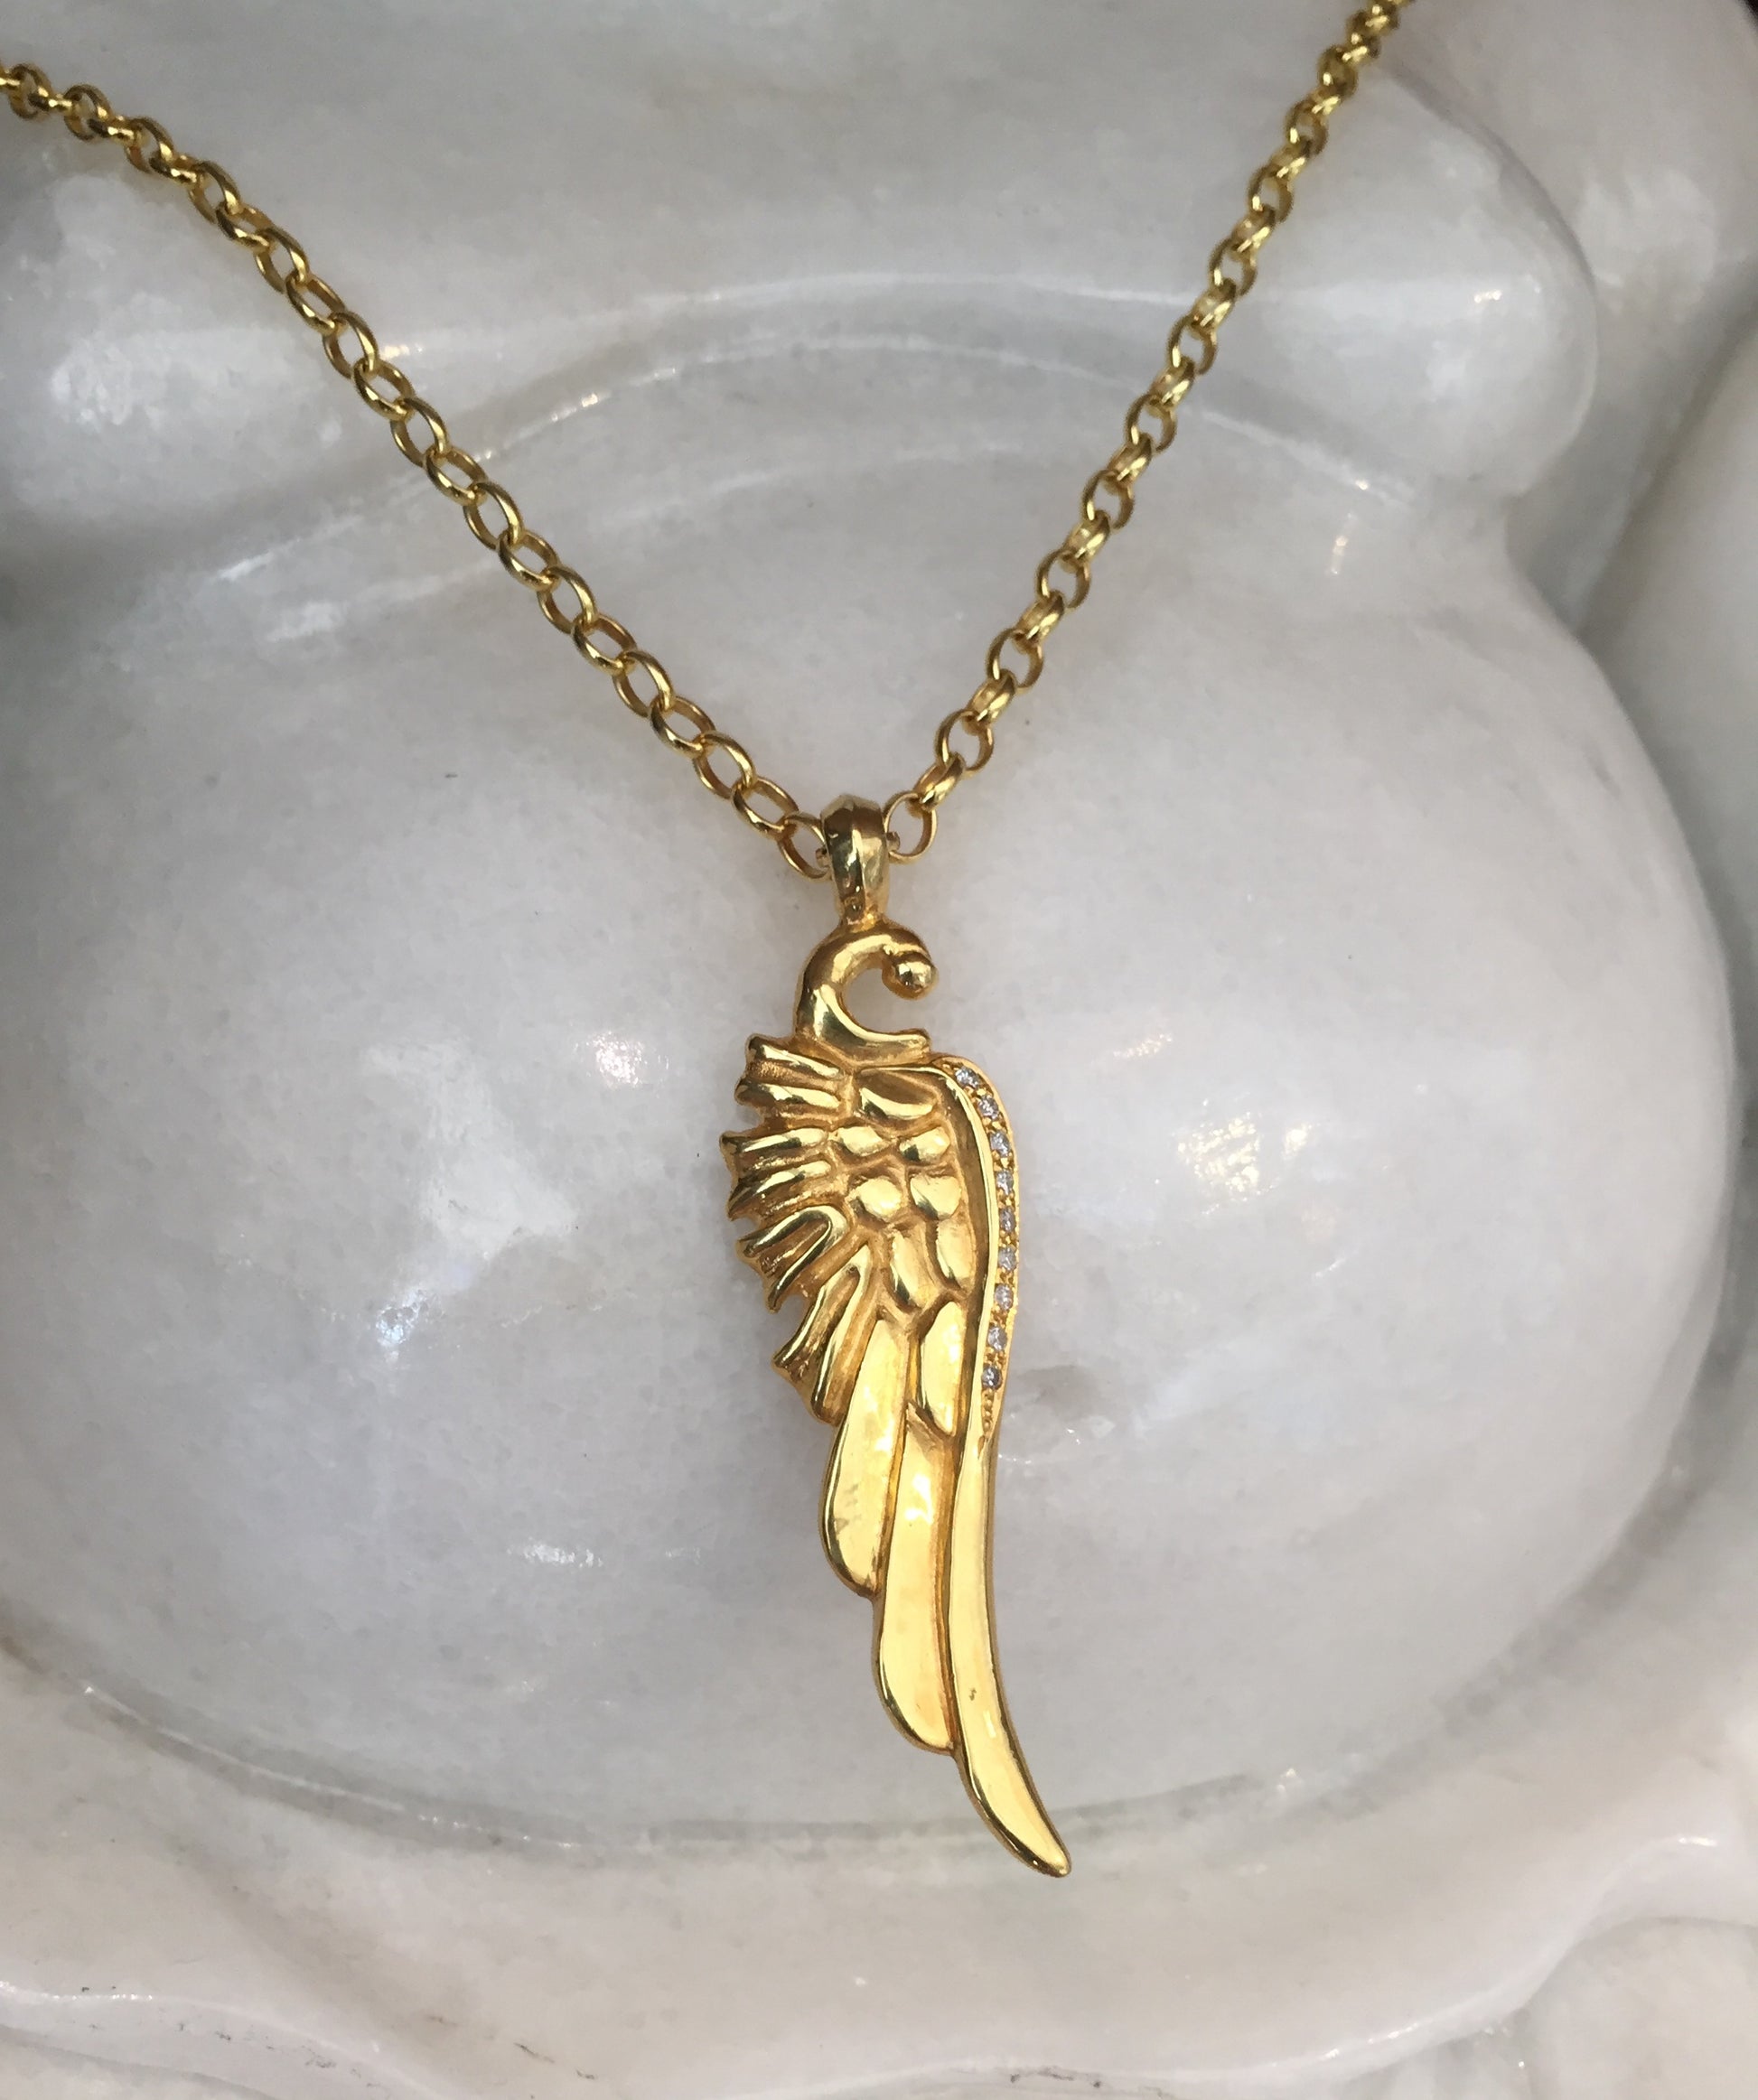 Necklace - Golden Angel Wing with Diamonds in sterling silver by Roman Paul jewelry